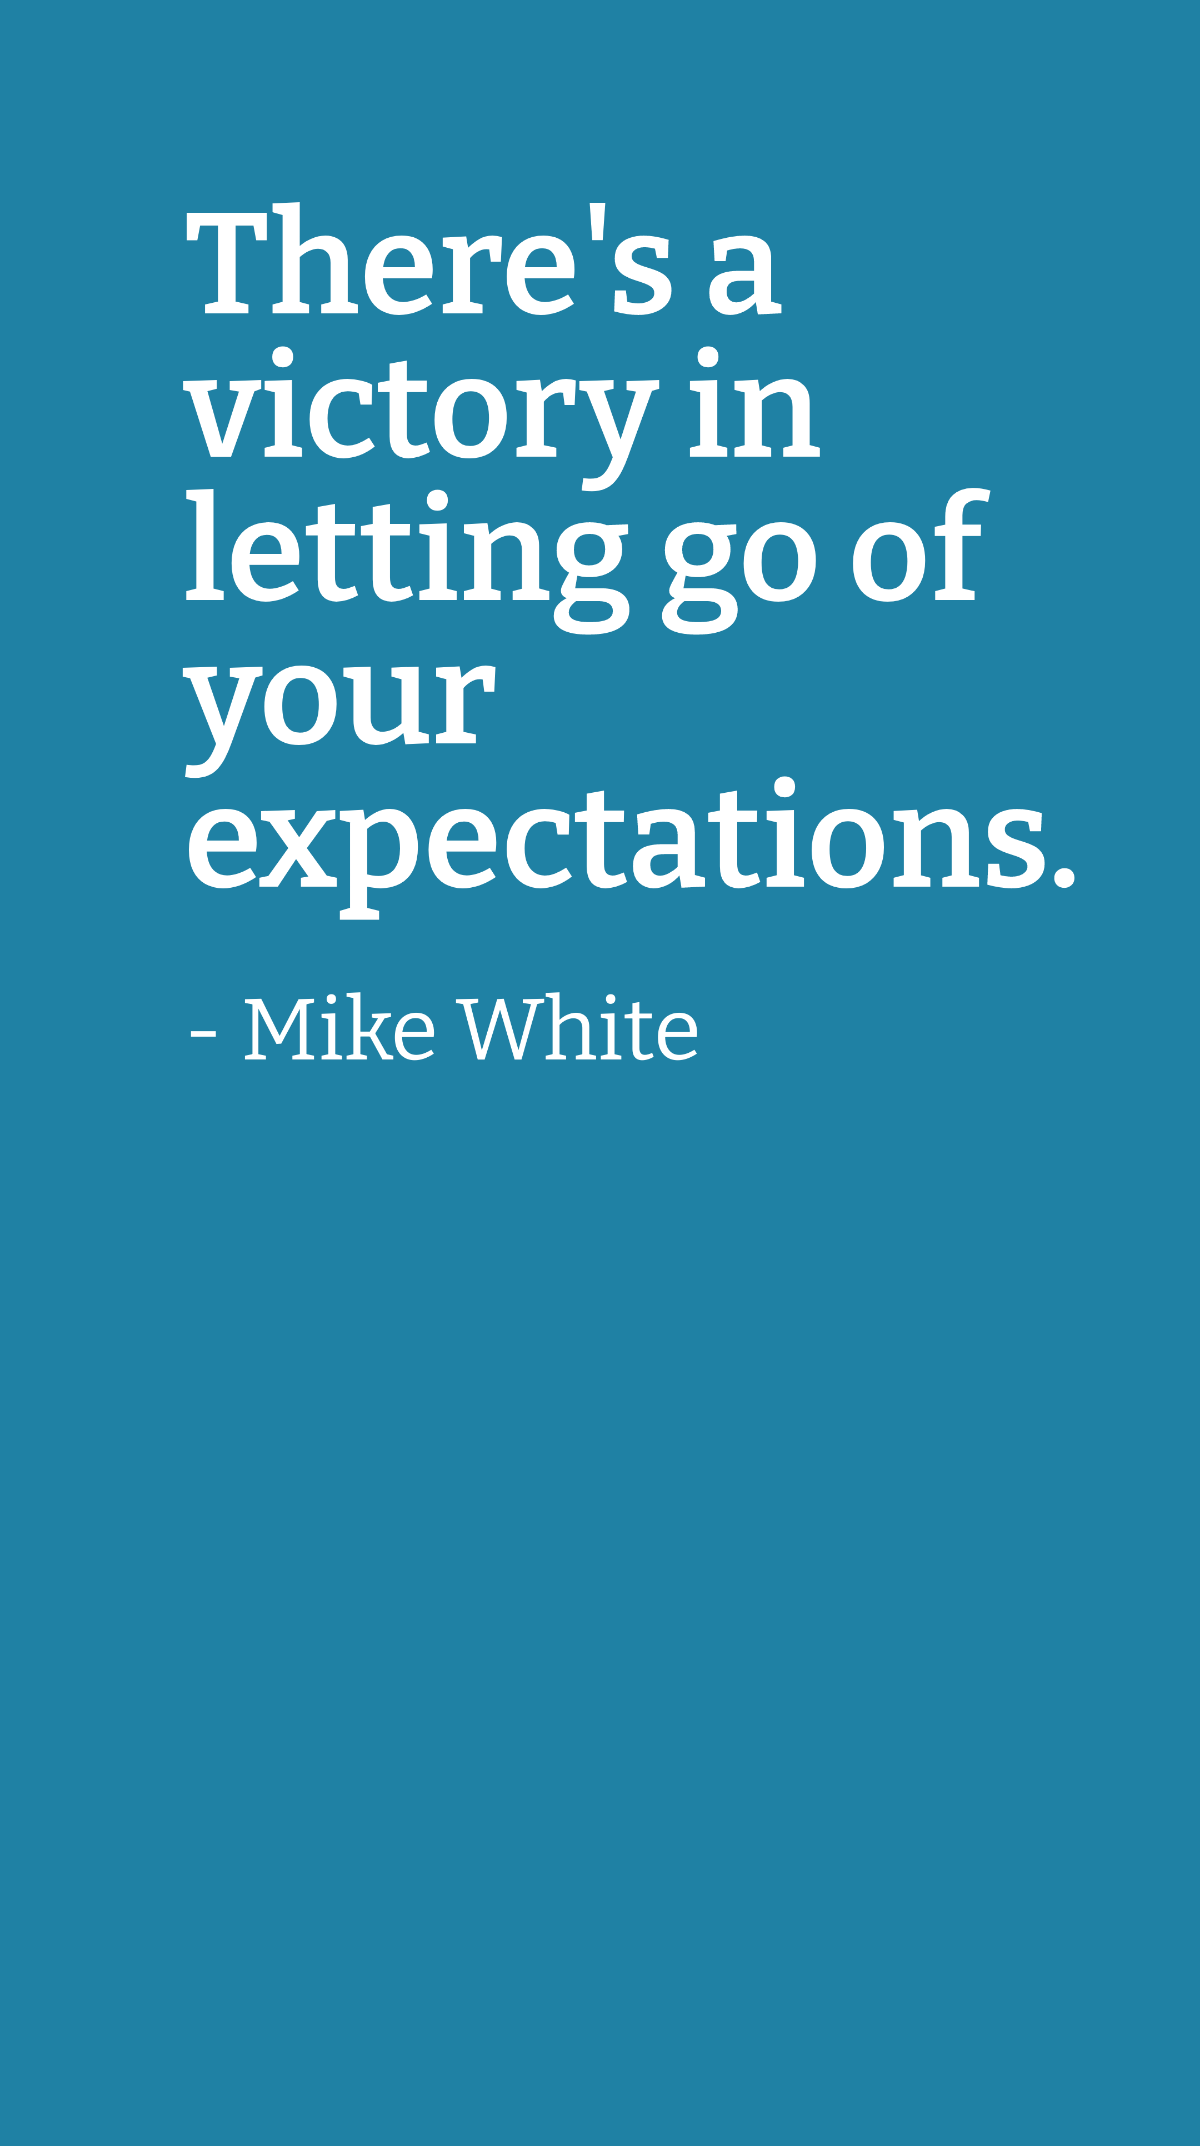 Mike White- There's a victory in letting go of your expectations. Template